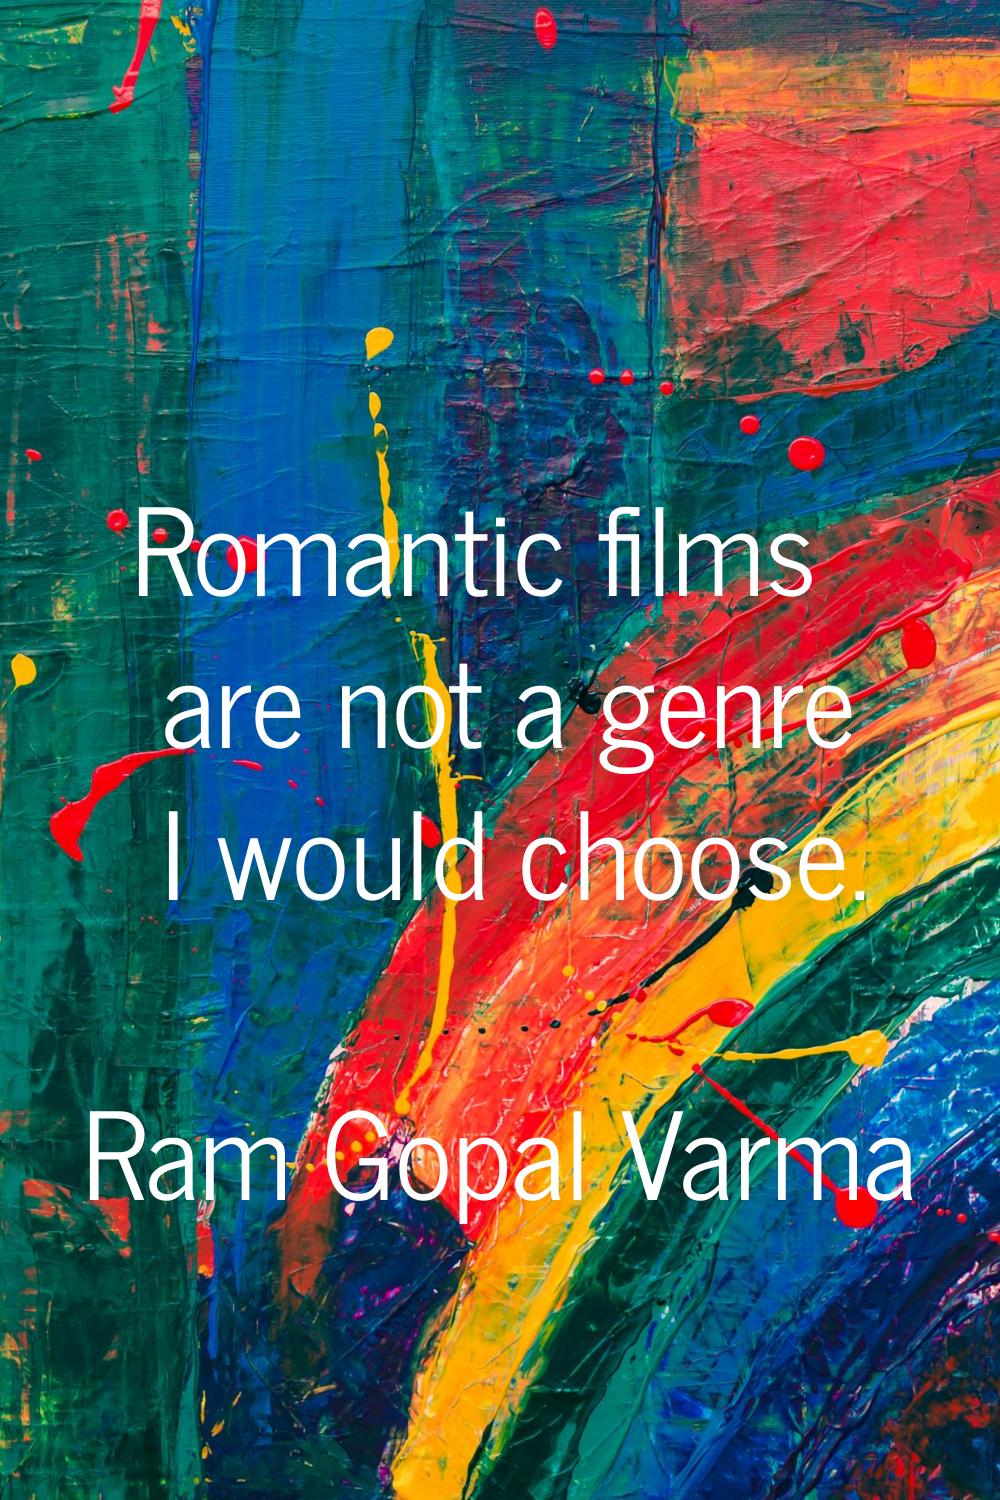 Romantic films are not a genre I would choose.